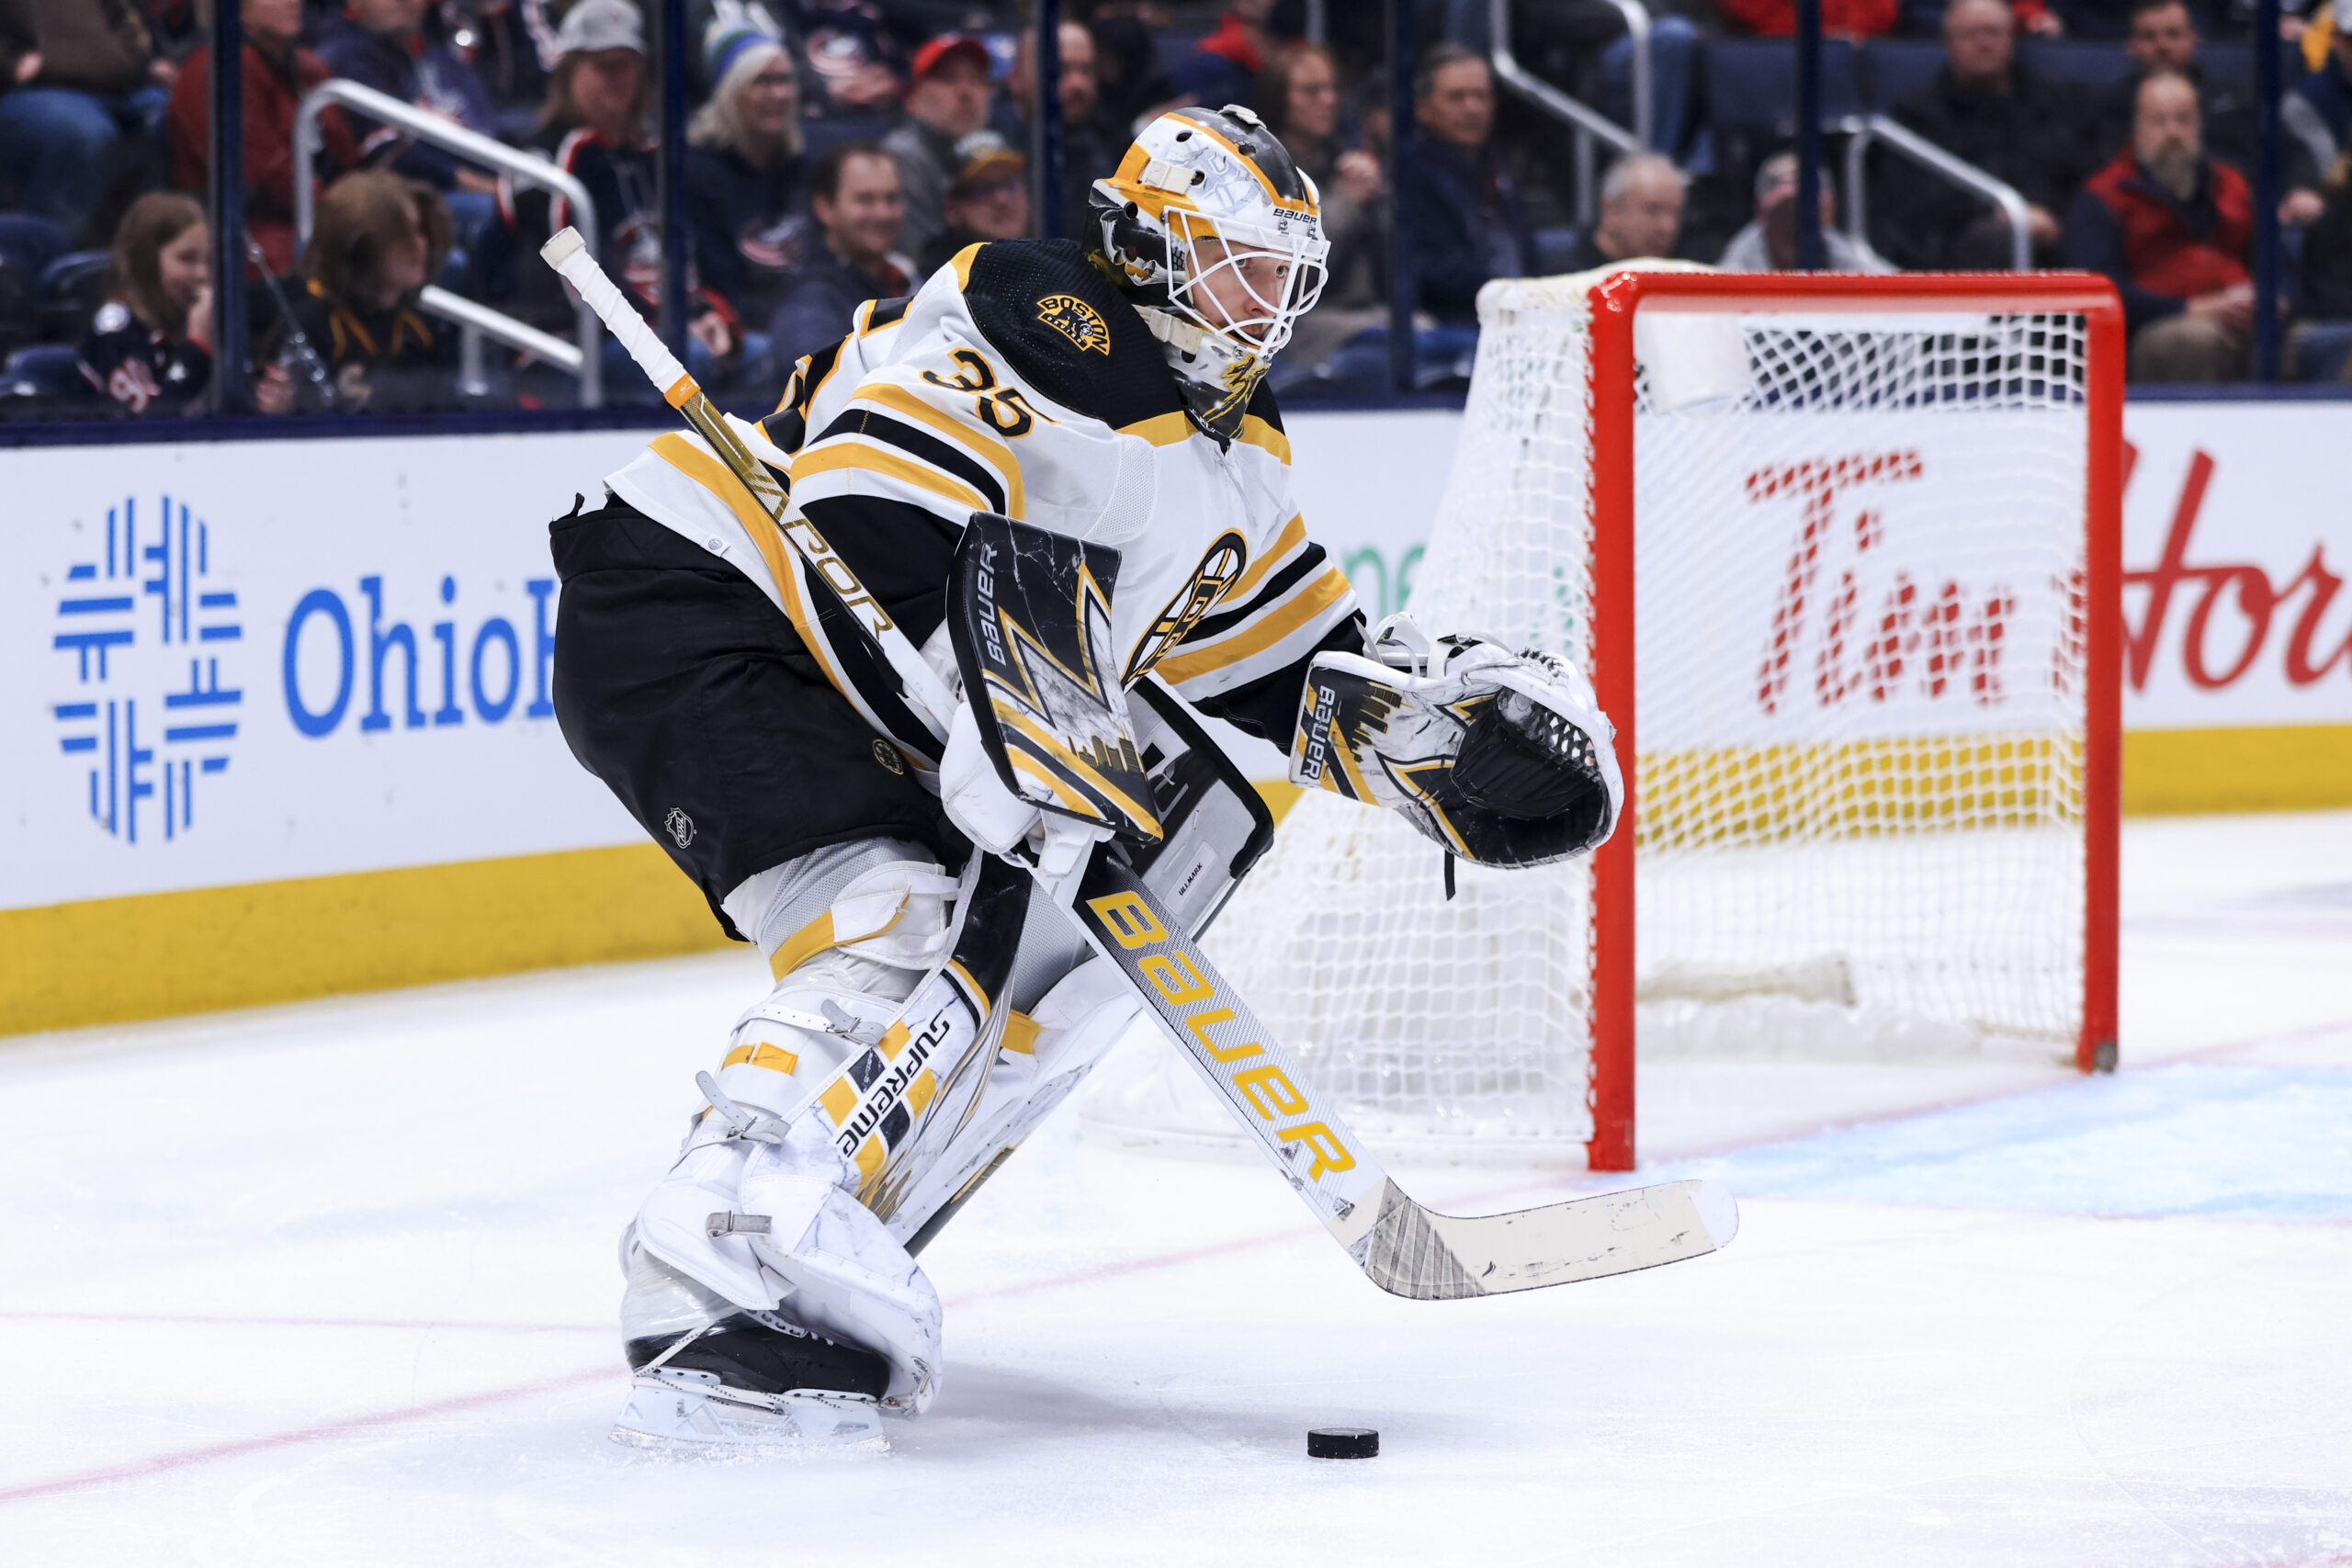 Apr 4, 2022; Columbus, Ohio, USA; Boston Bruins goaltender Linus Ullmark (35) plays the puck against the Columbus Blue Jackets in the first period at Nationwide Arena. Mandatory Credit: Aaron Doster-USA TODAY Sports